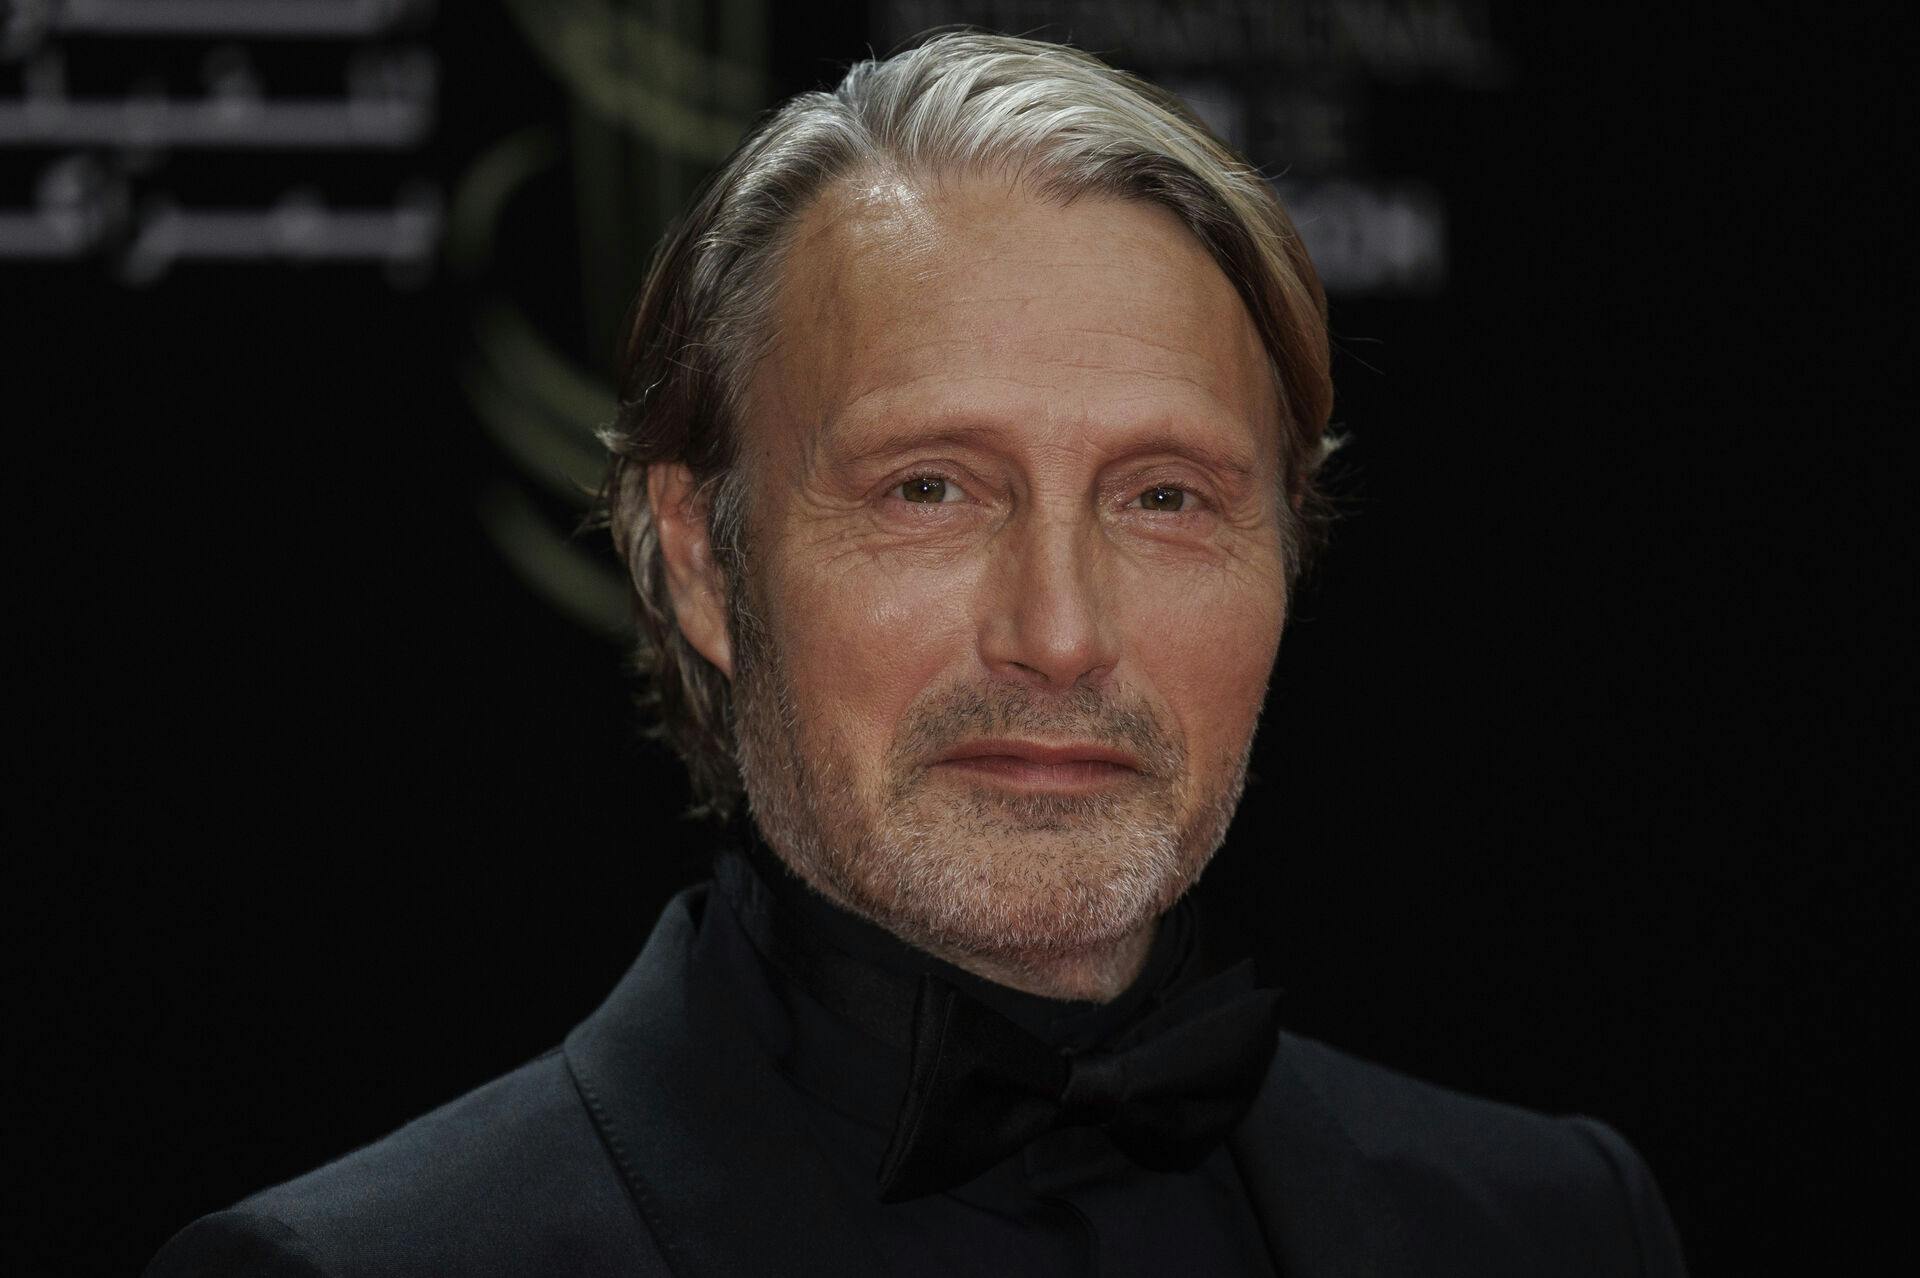 Mads Mikkelsen poses for photographers before the opening ceremony of the Marrakech International Film Festival in Marrakech, Morroco, Friday, Nov. 24, 2023. (Photo by Vianney Le Caer/Invision/AP)